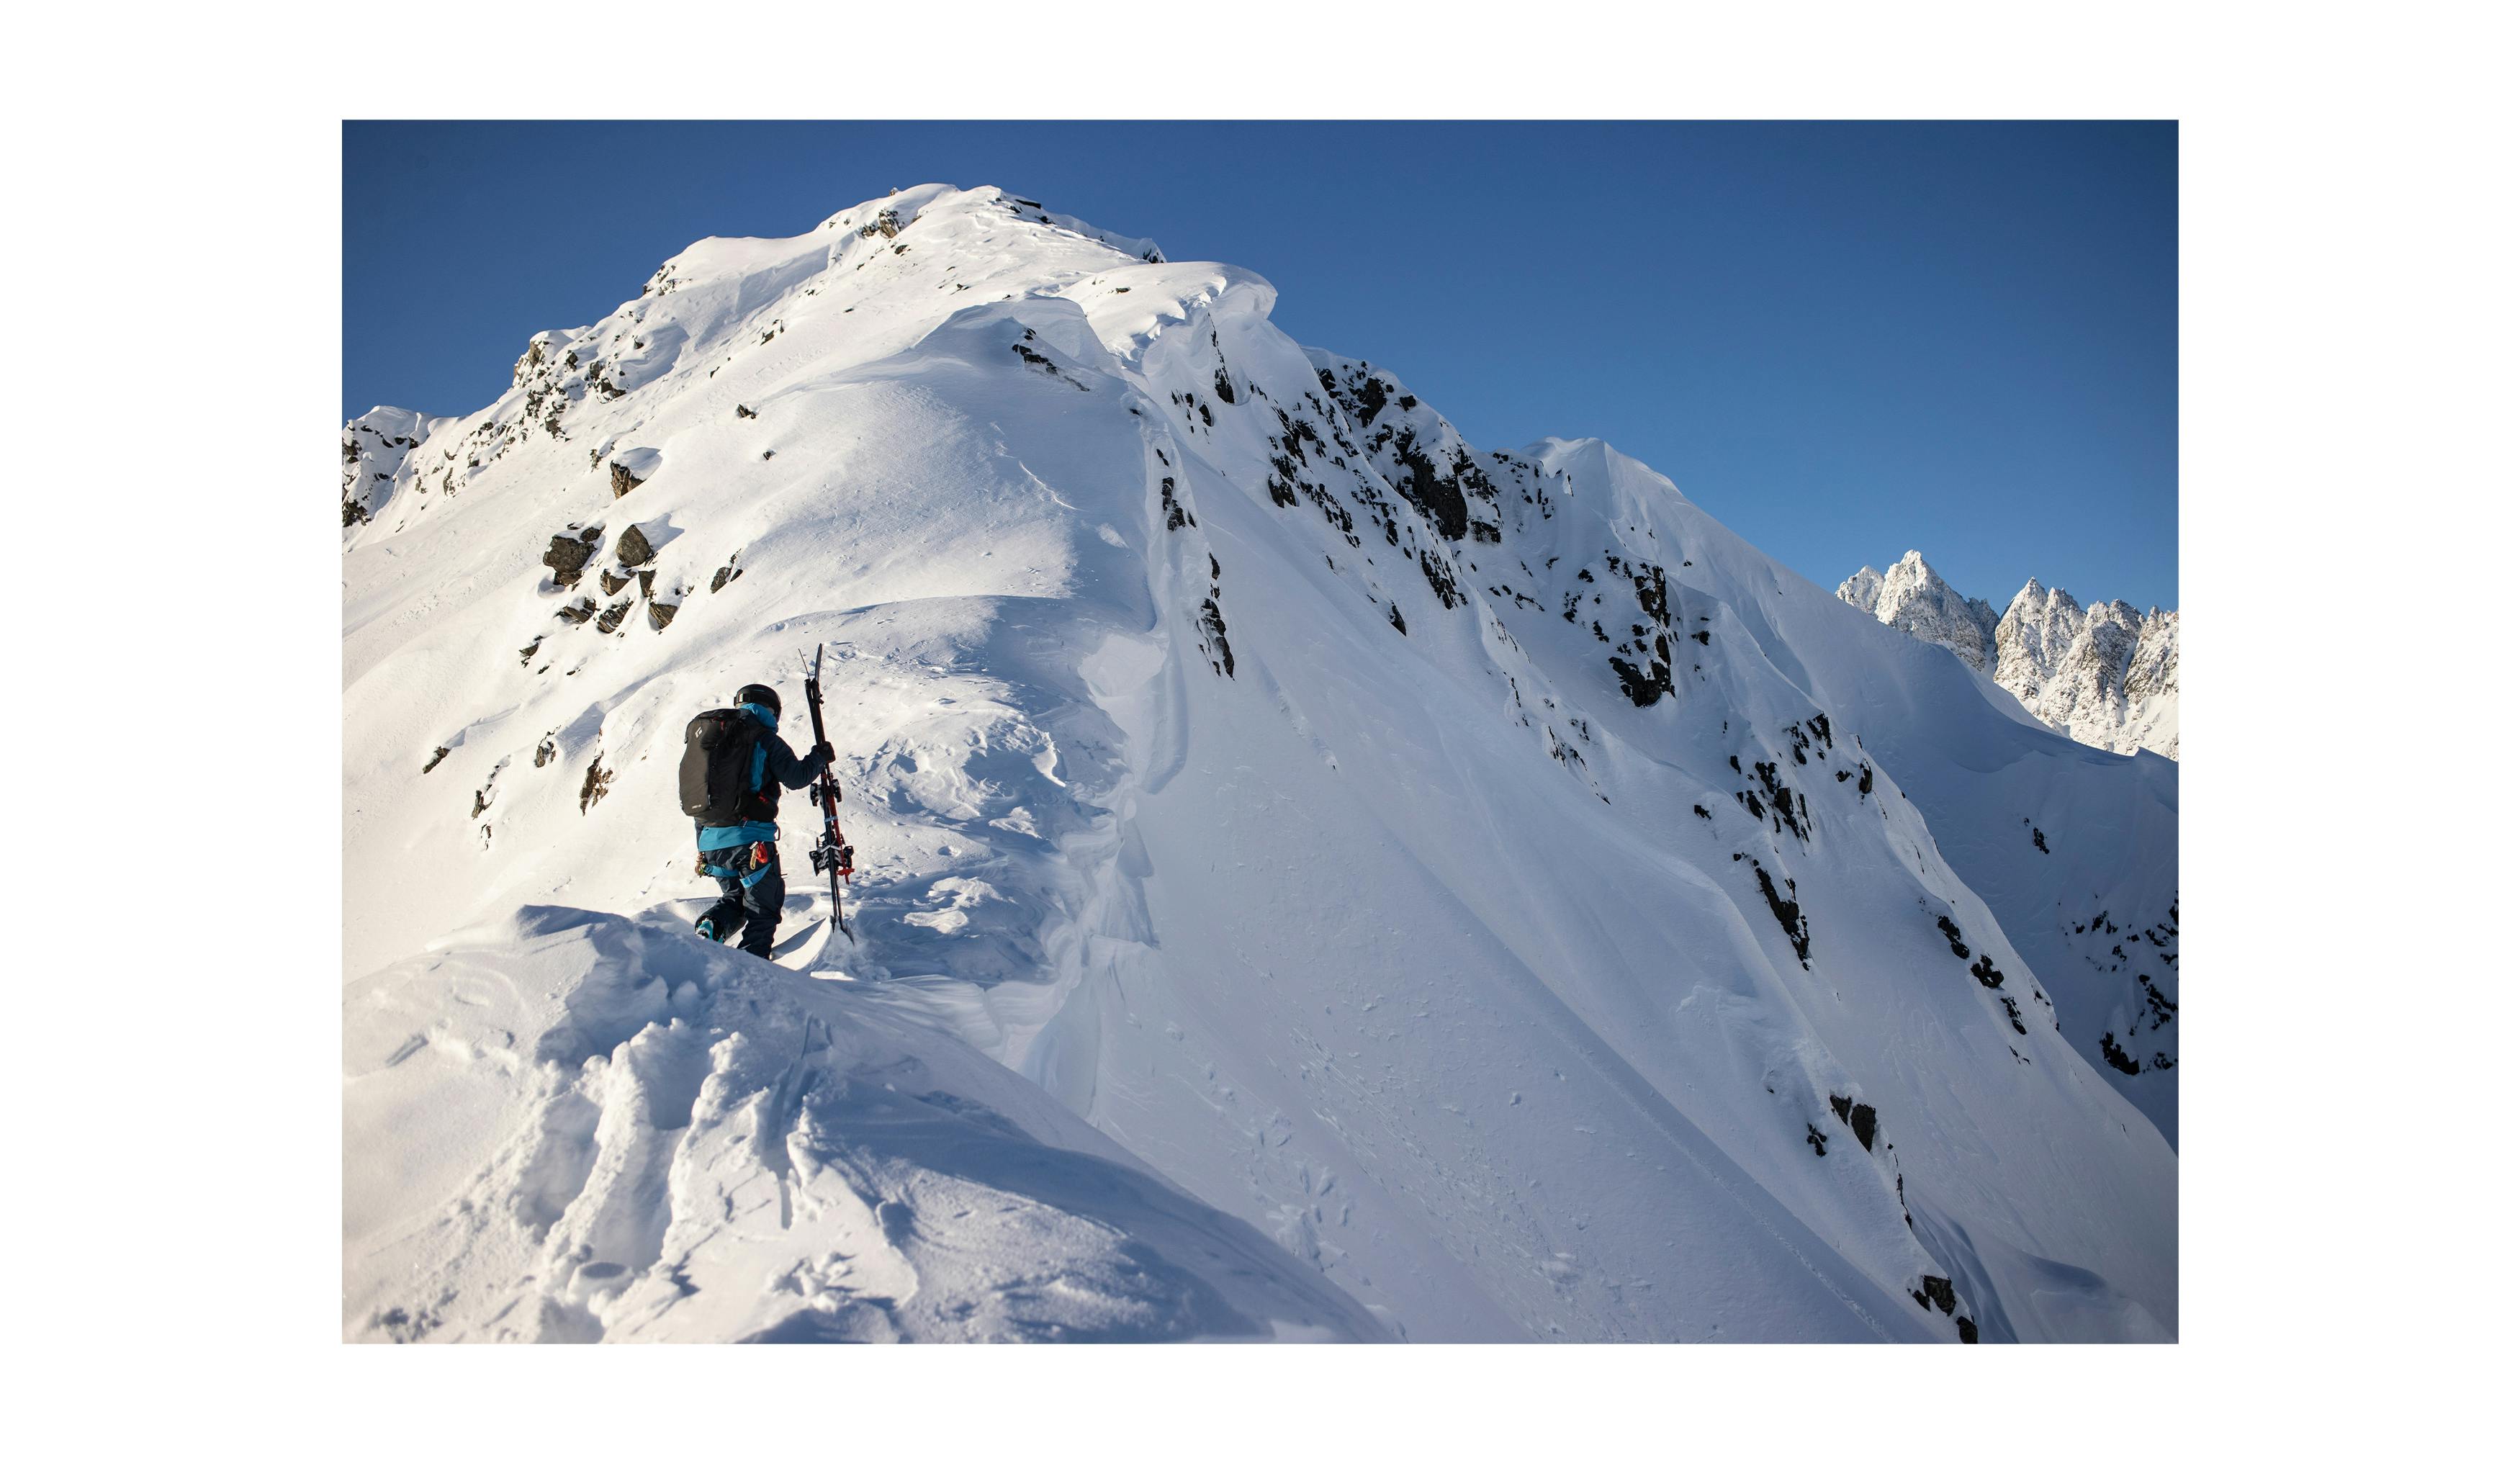 A backcountry skier traverses a ridge line of snow cornices .